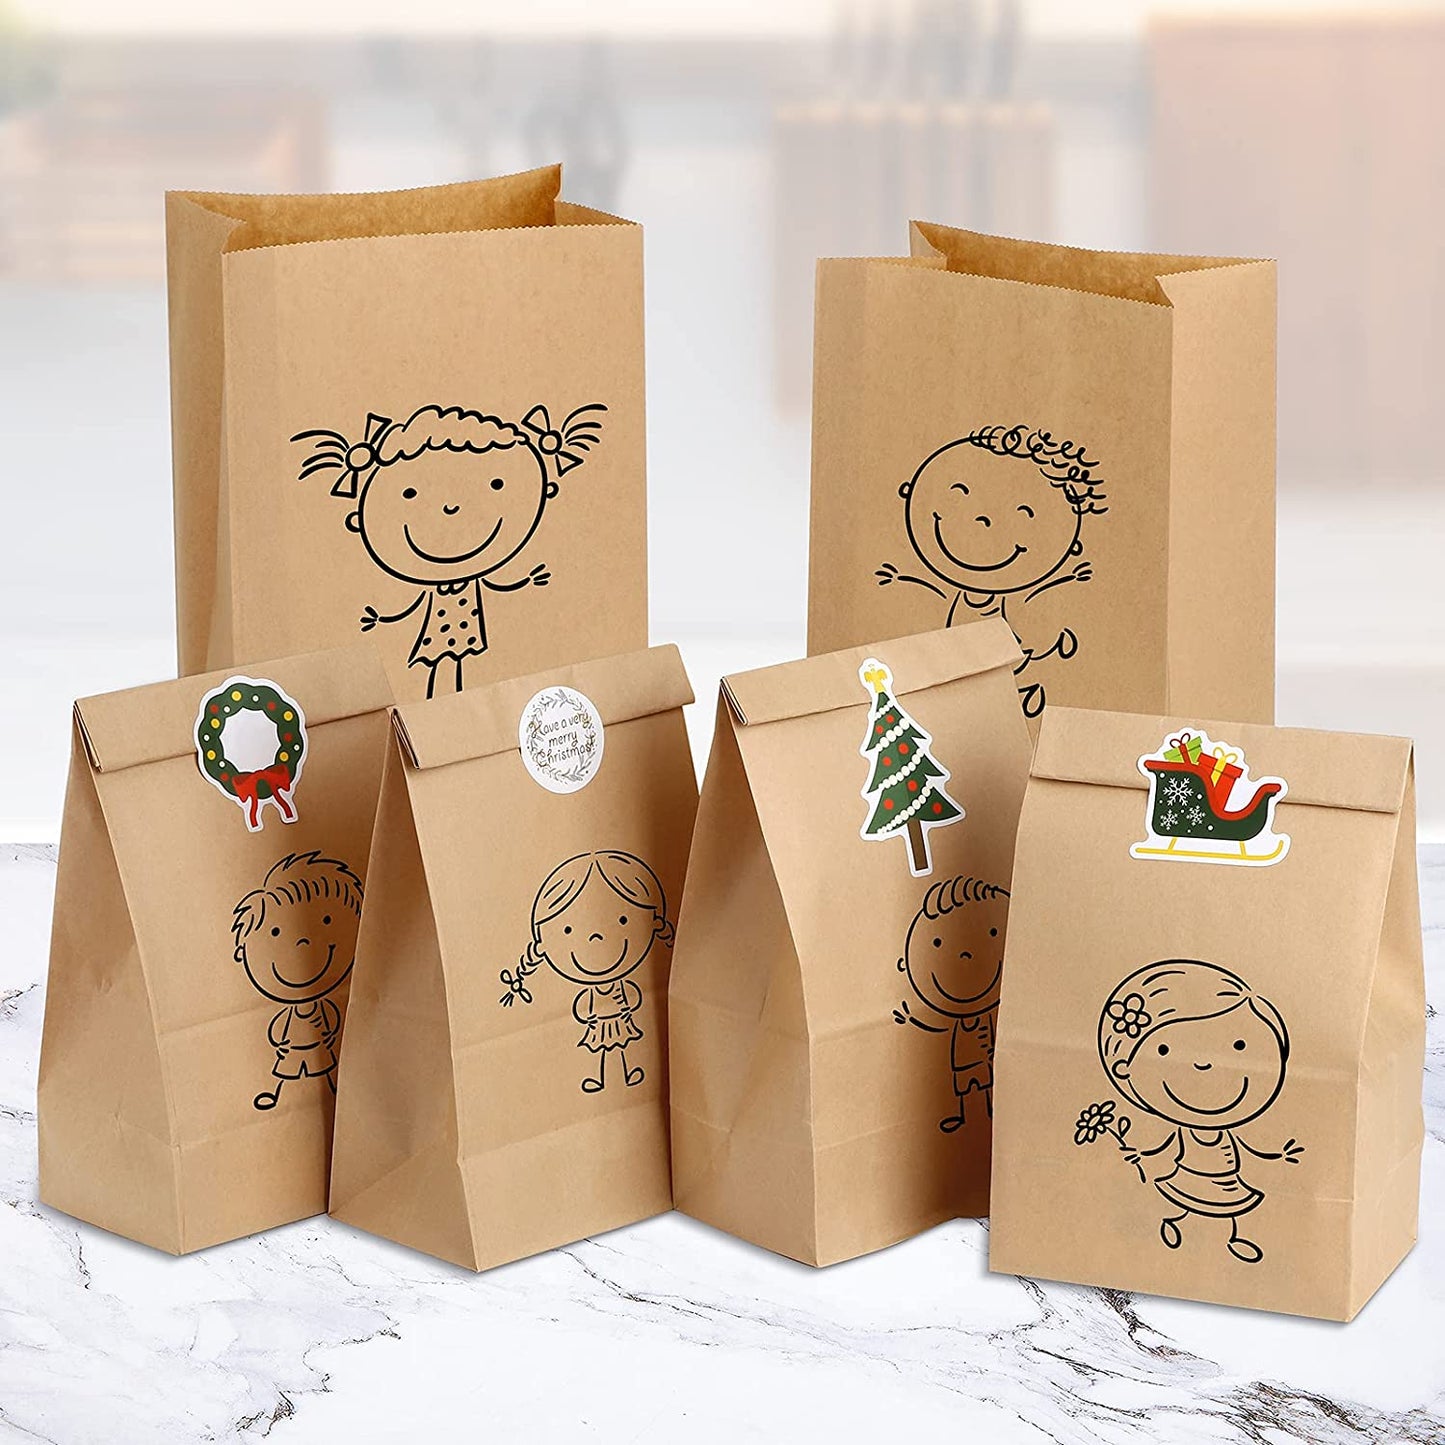 ECO Friendly Paper Sandwich & Snack Bags by TOASTABAGS - 25 Bags